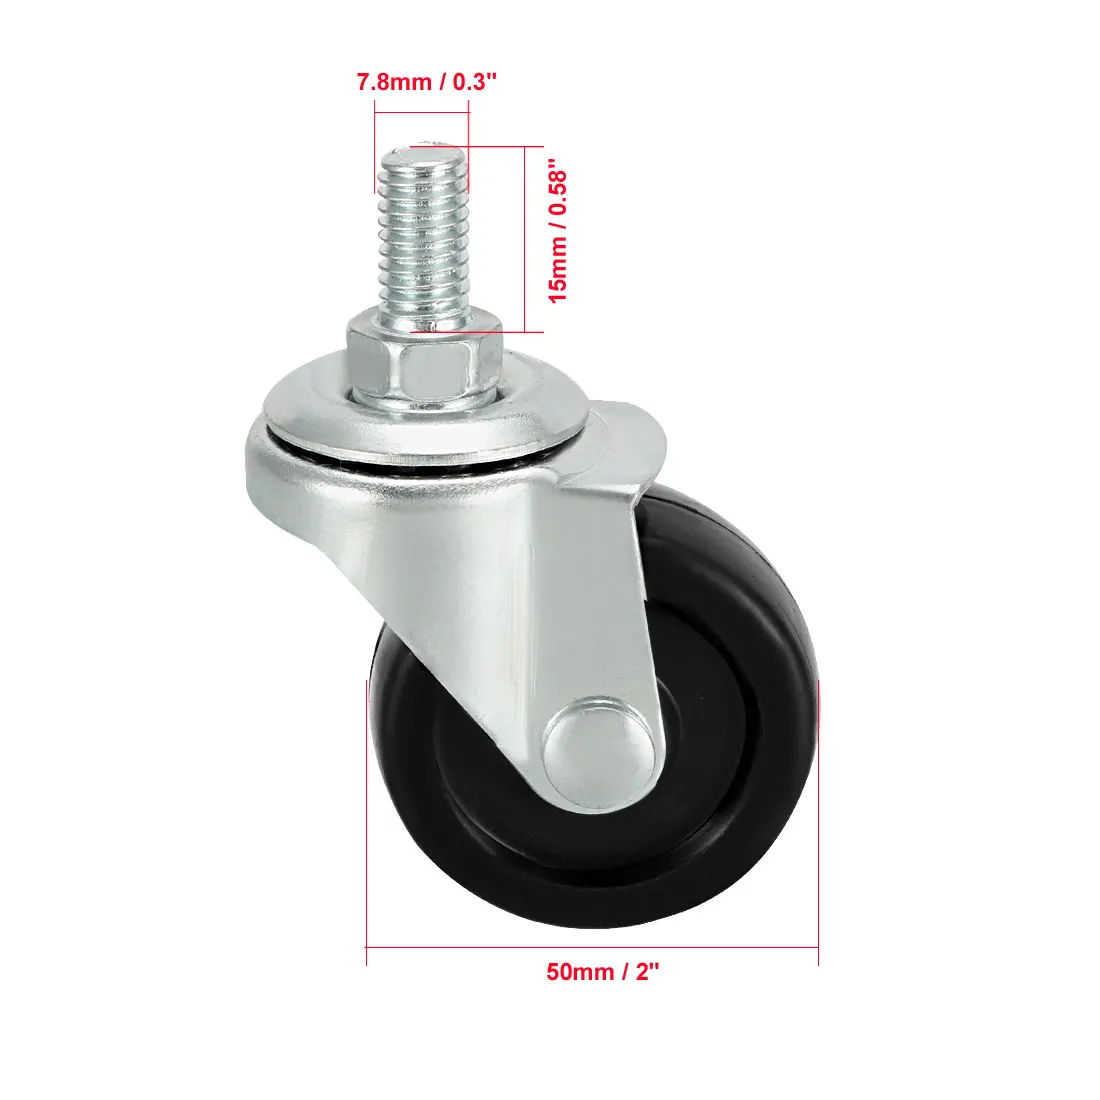 2 Inch Pu Twin Wheel M10x15mm Threaded Caster Black with Brake 2pcs uxcell Swivel Caster Wheel 